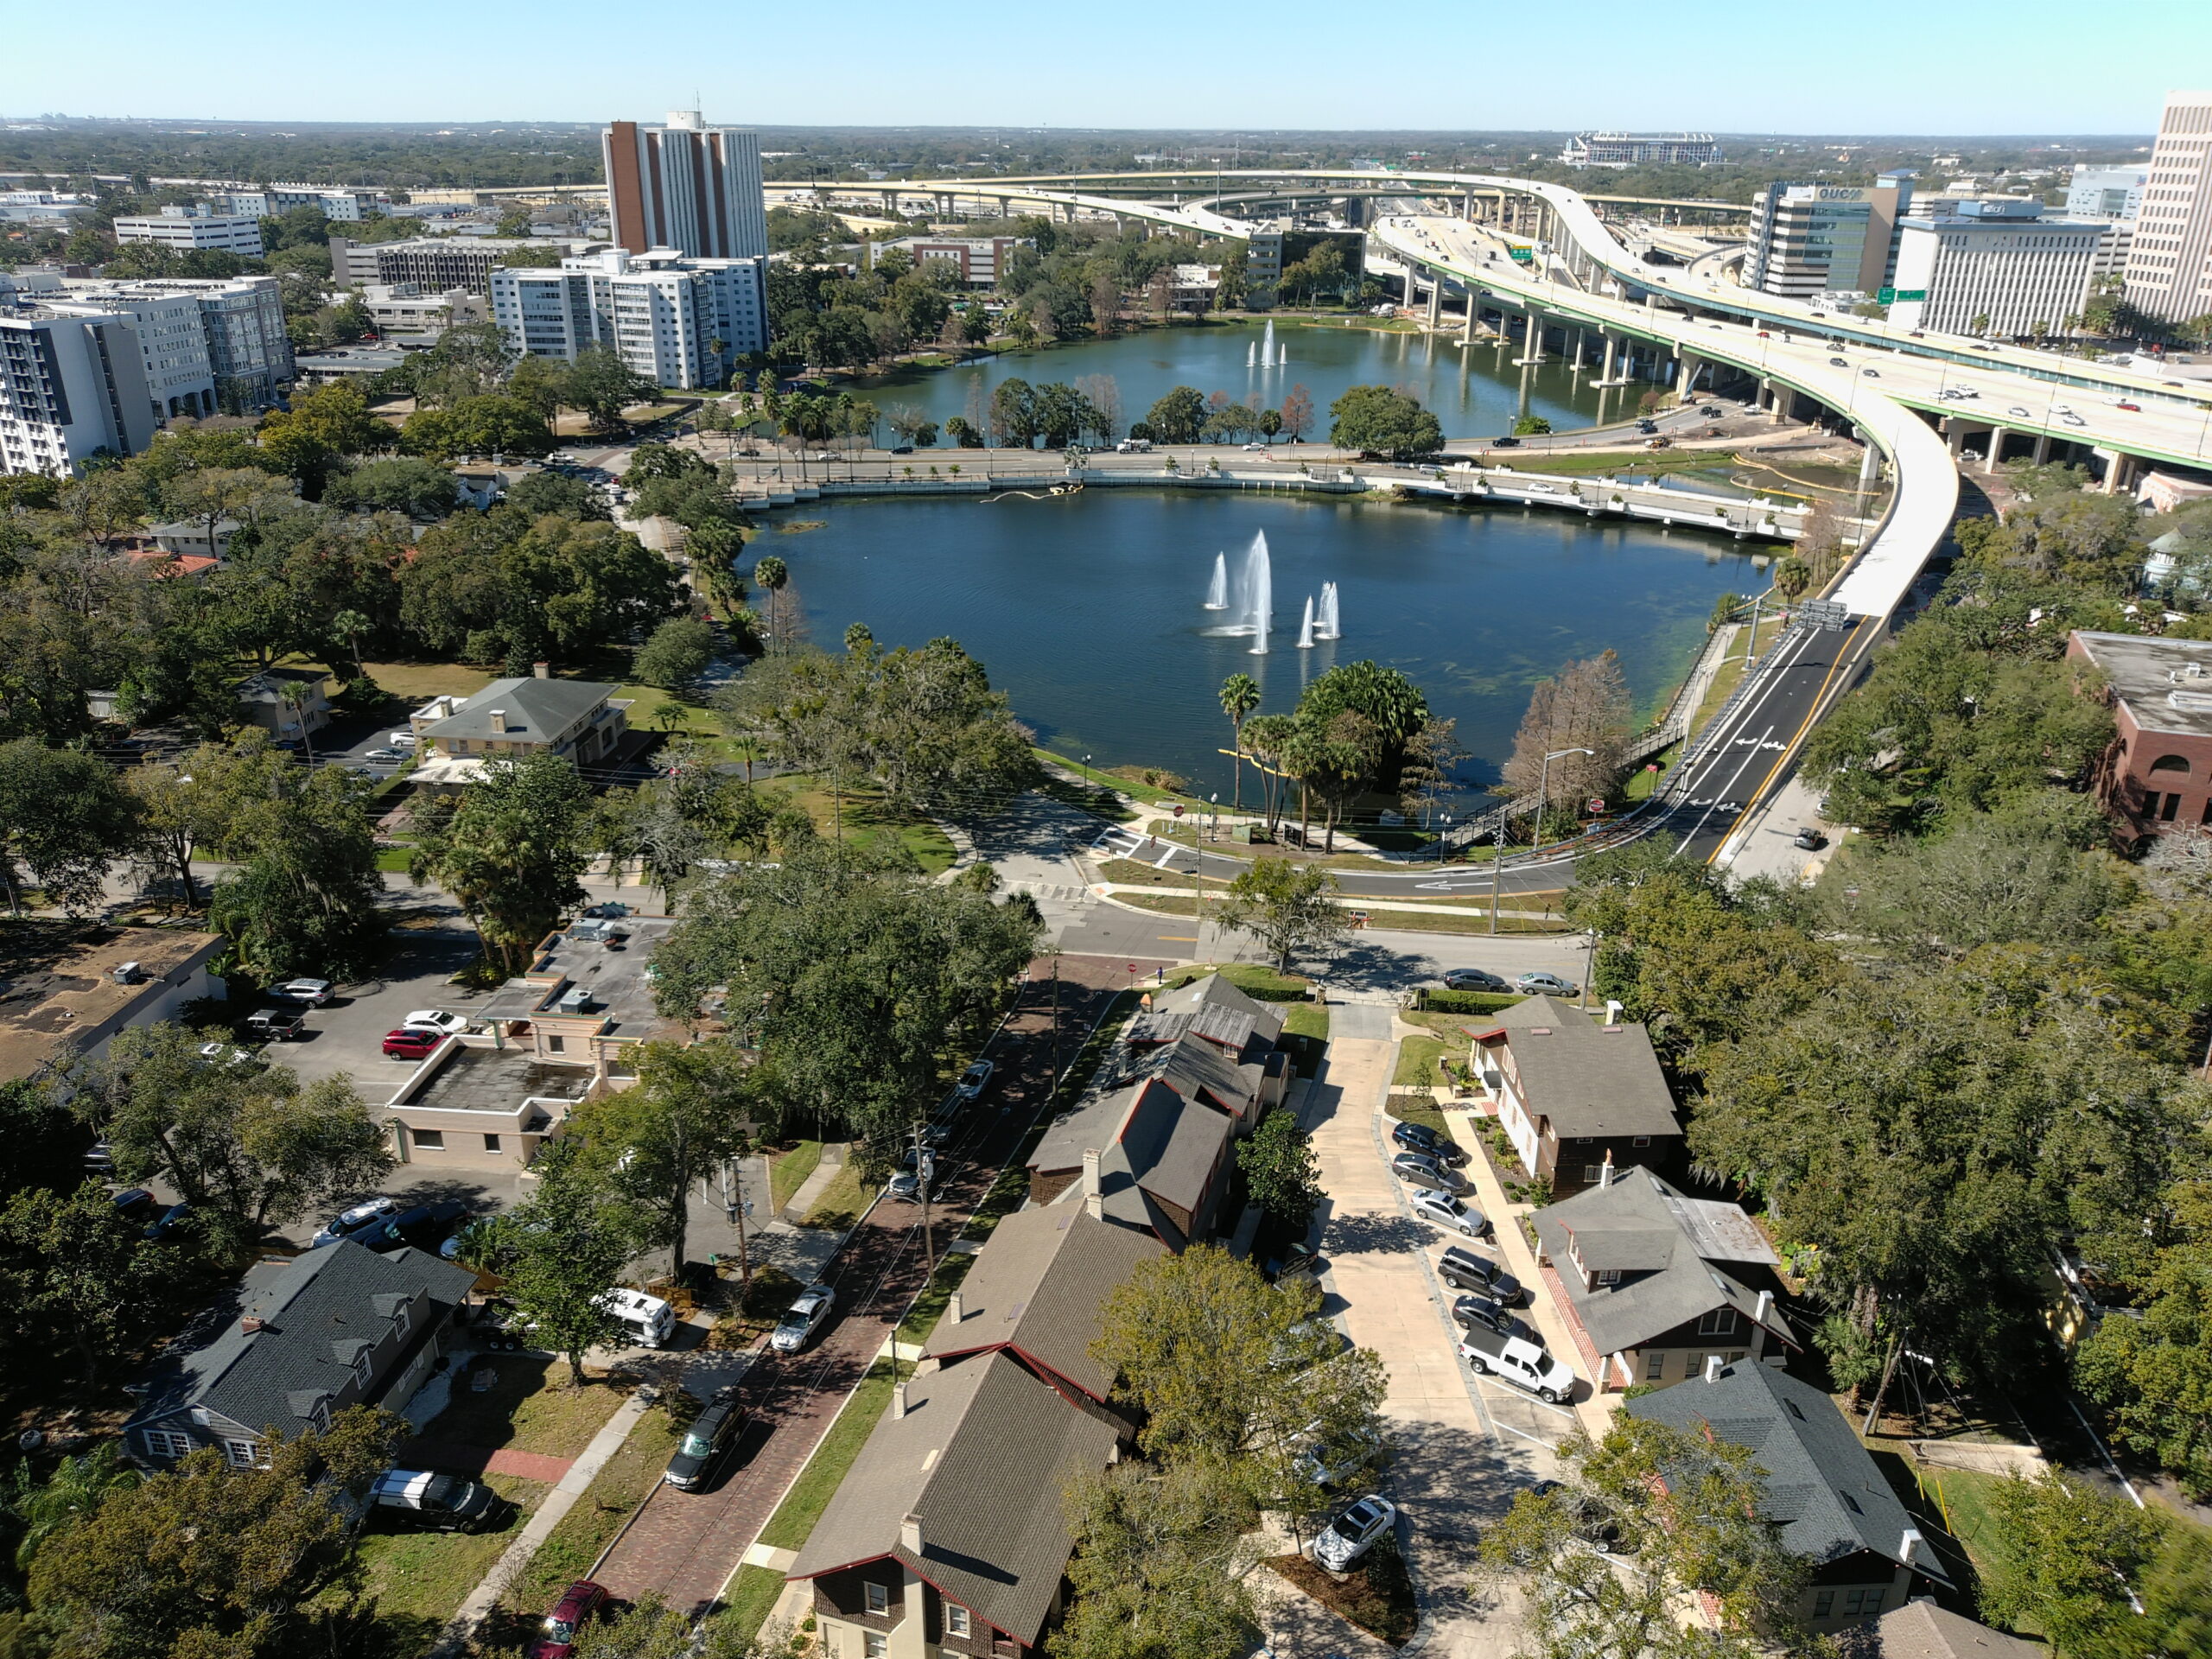 A view of a neighborhood next to a freeway and lakes